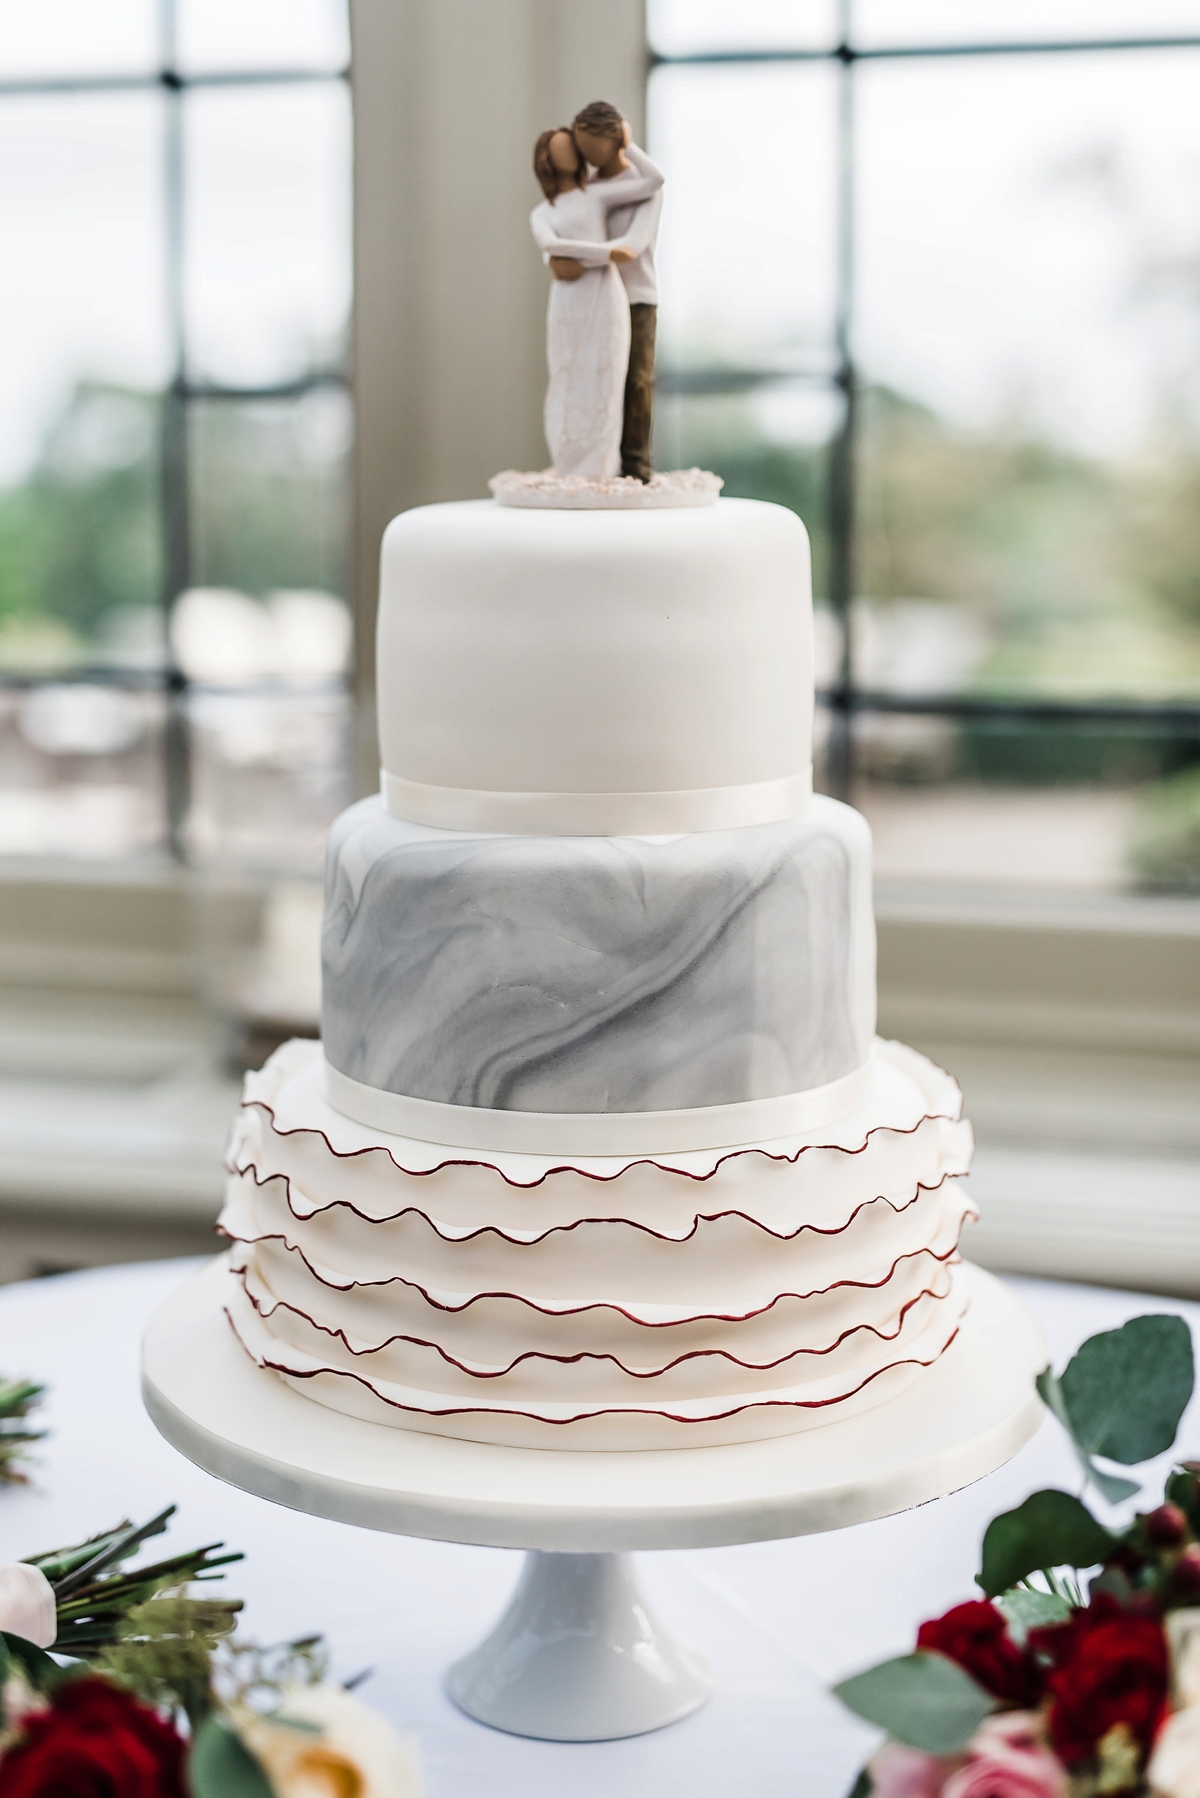 60 Three tier marbled effect wedding cake by Melody Cakes. Images by Su Ann Simon